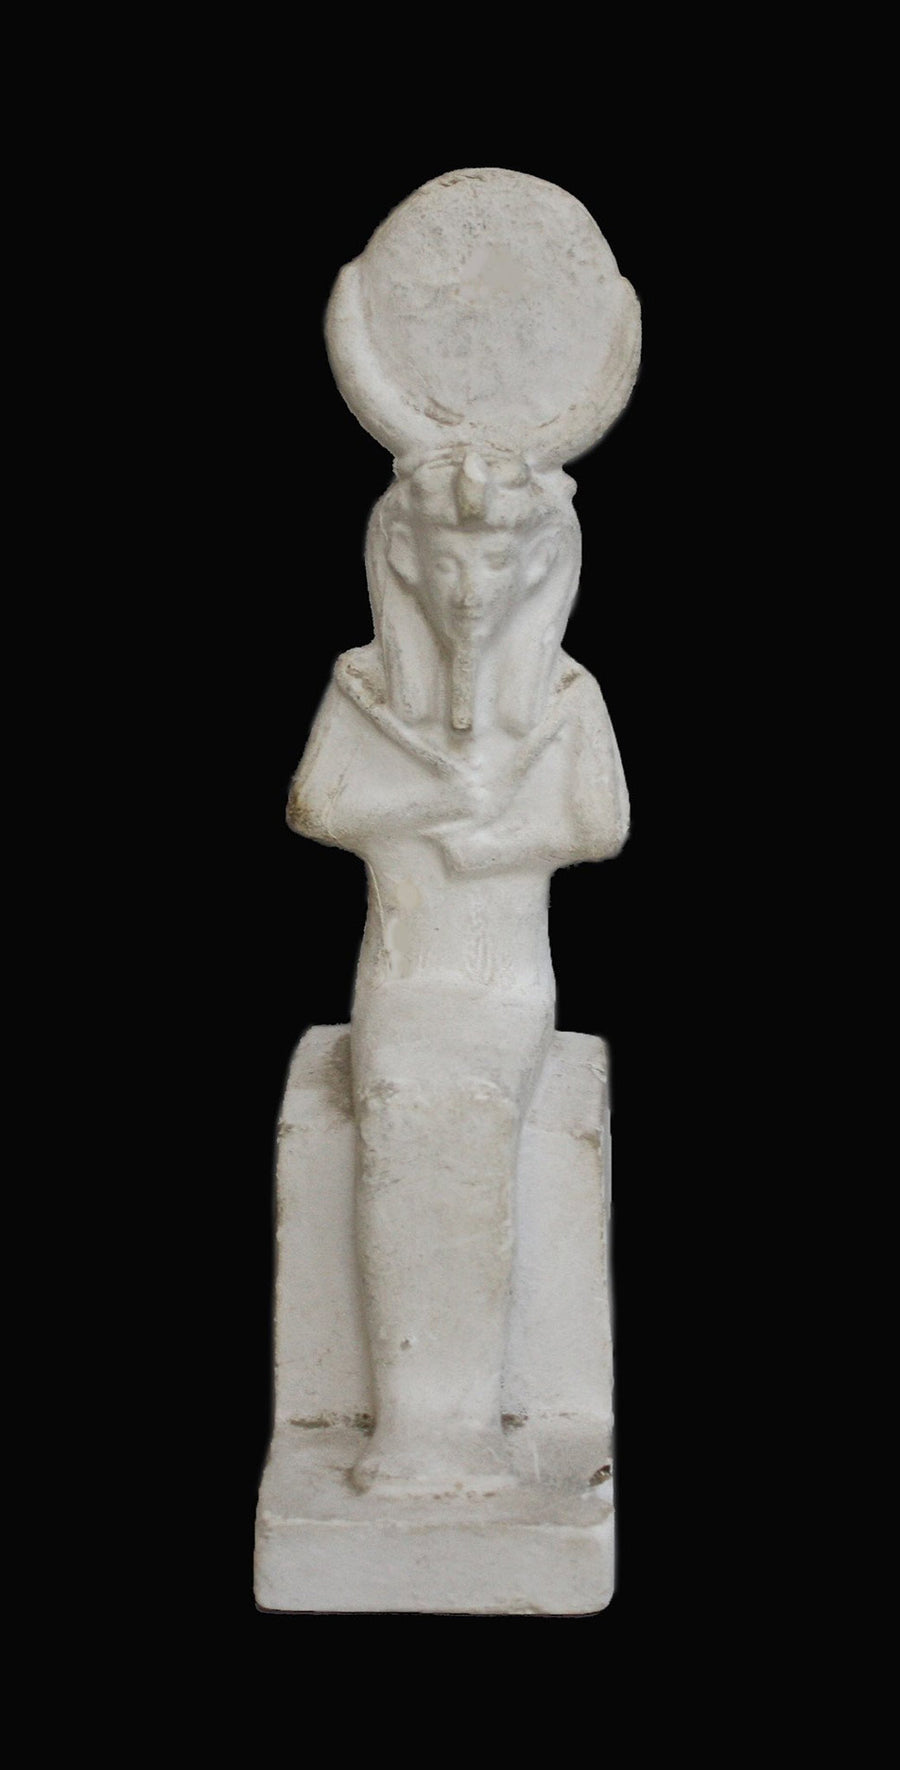 photo with black background of plaster cast sculpture of Egyptian mummy seated